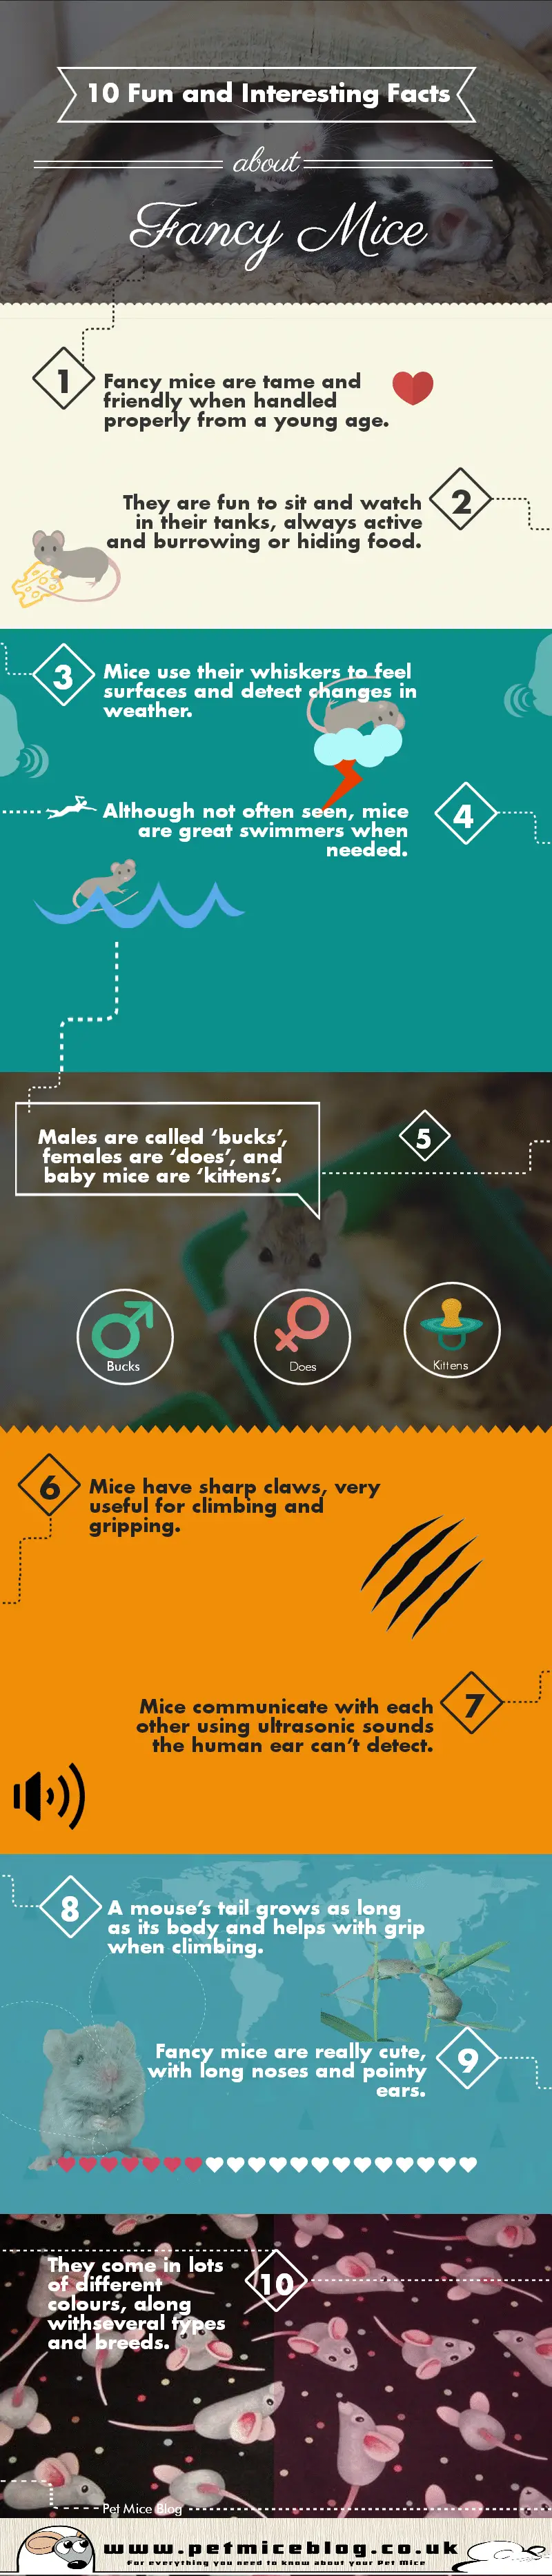 10 fun and interesting facts about fancy mice infographic